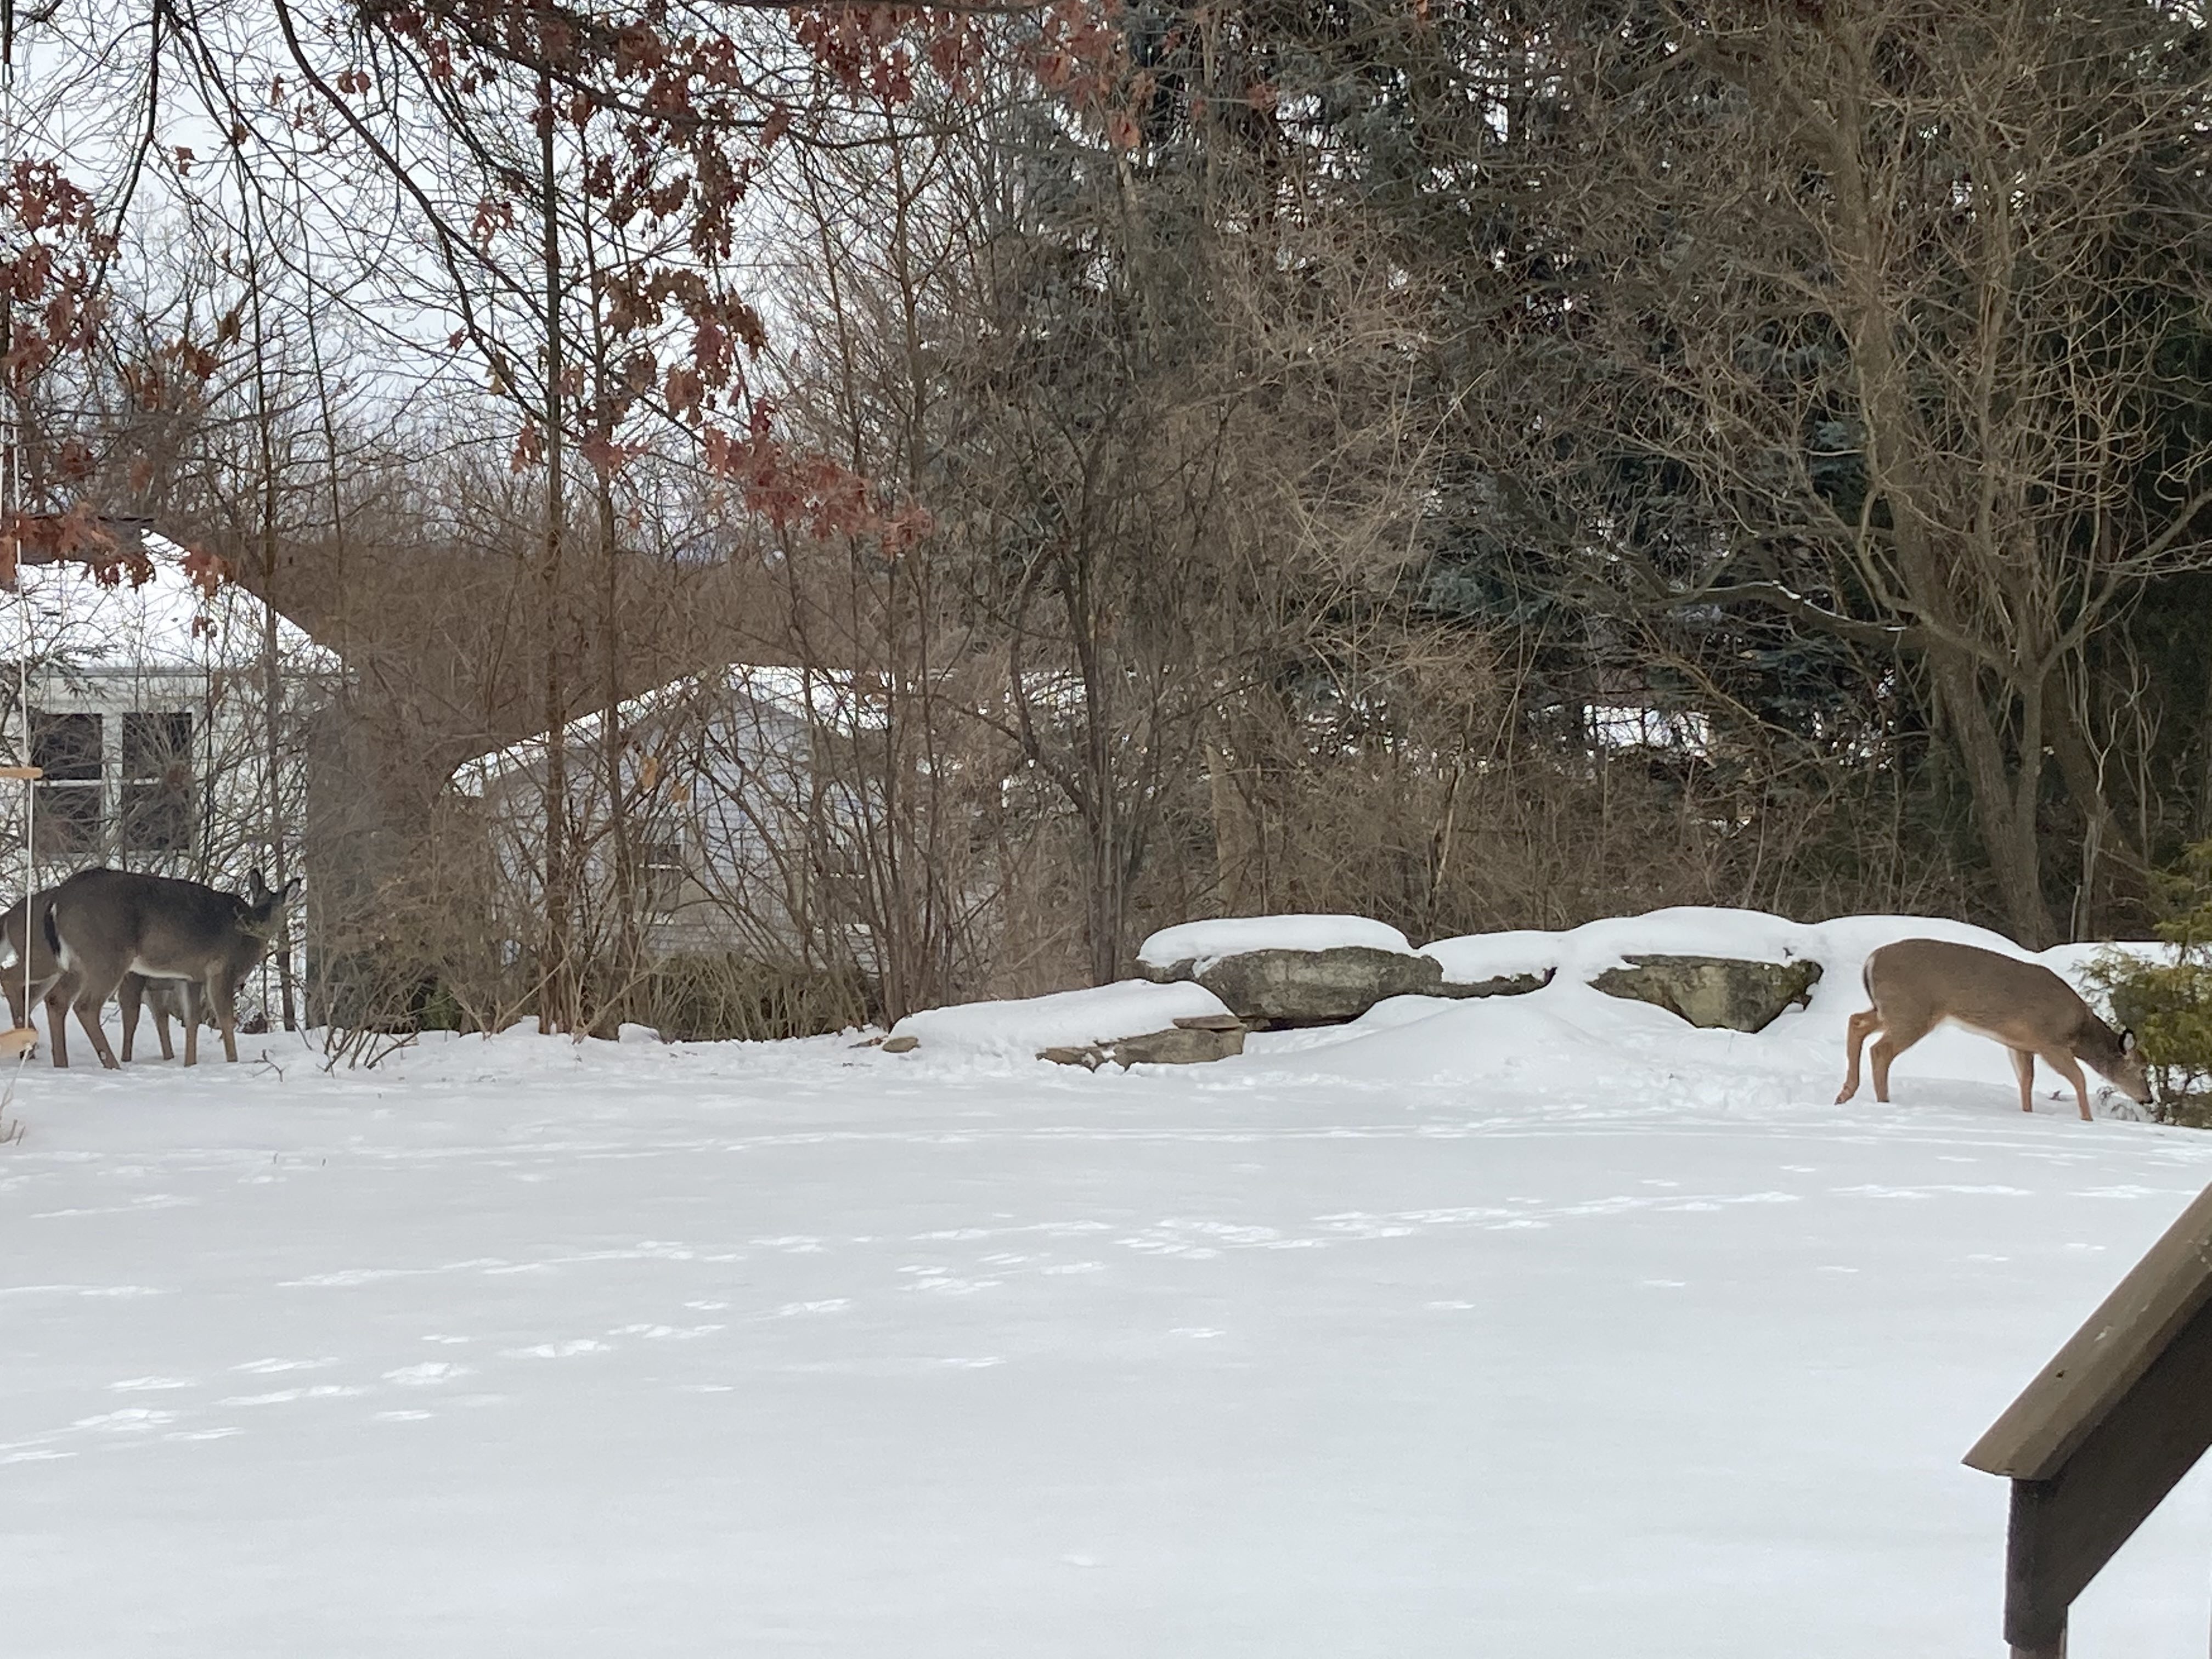 Photo of winter in our backyard including rocks and trees.  There are footprints in the snow, and three deer stand near the back (one is immediately behind another, so it may appear at first to only look like two deer).